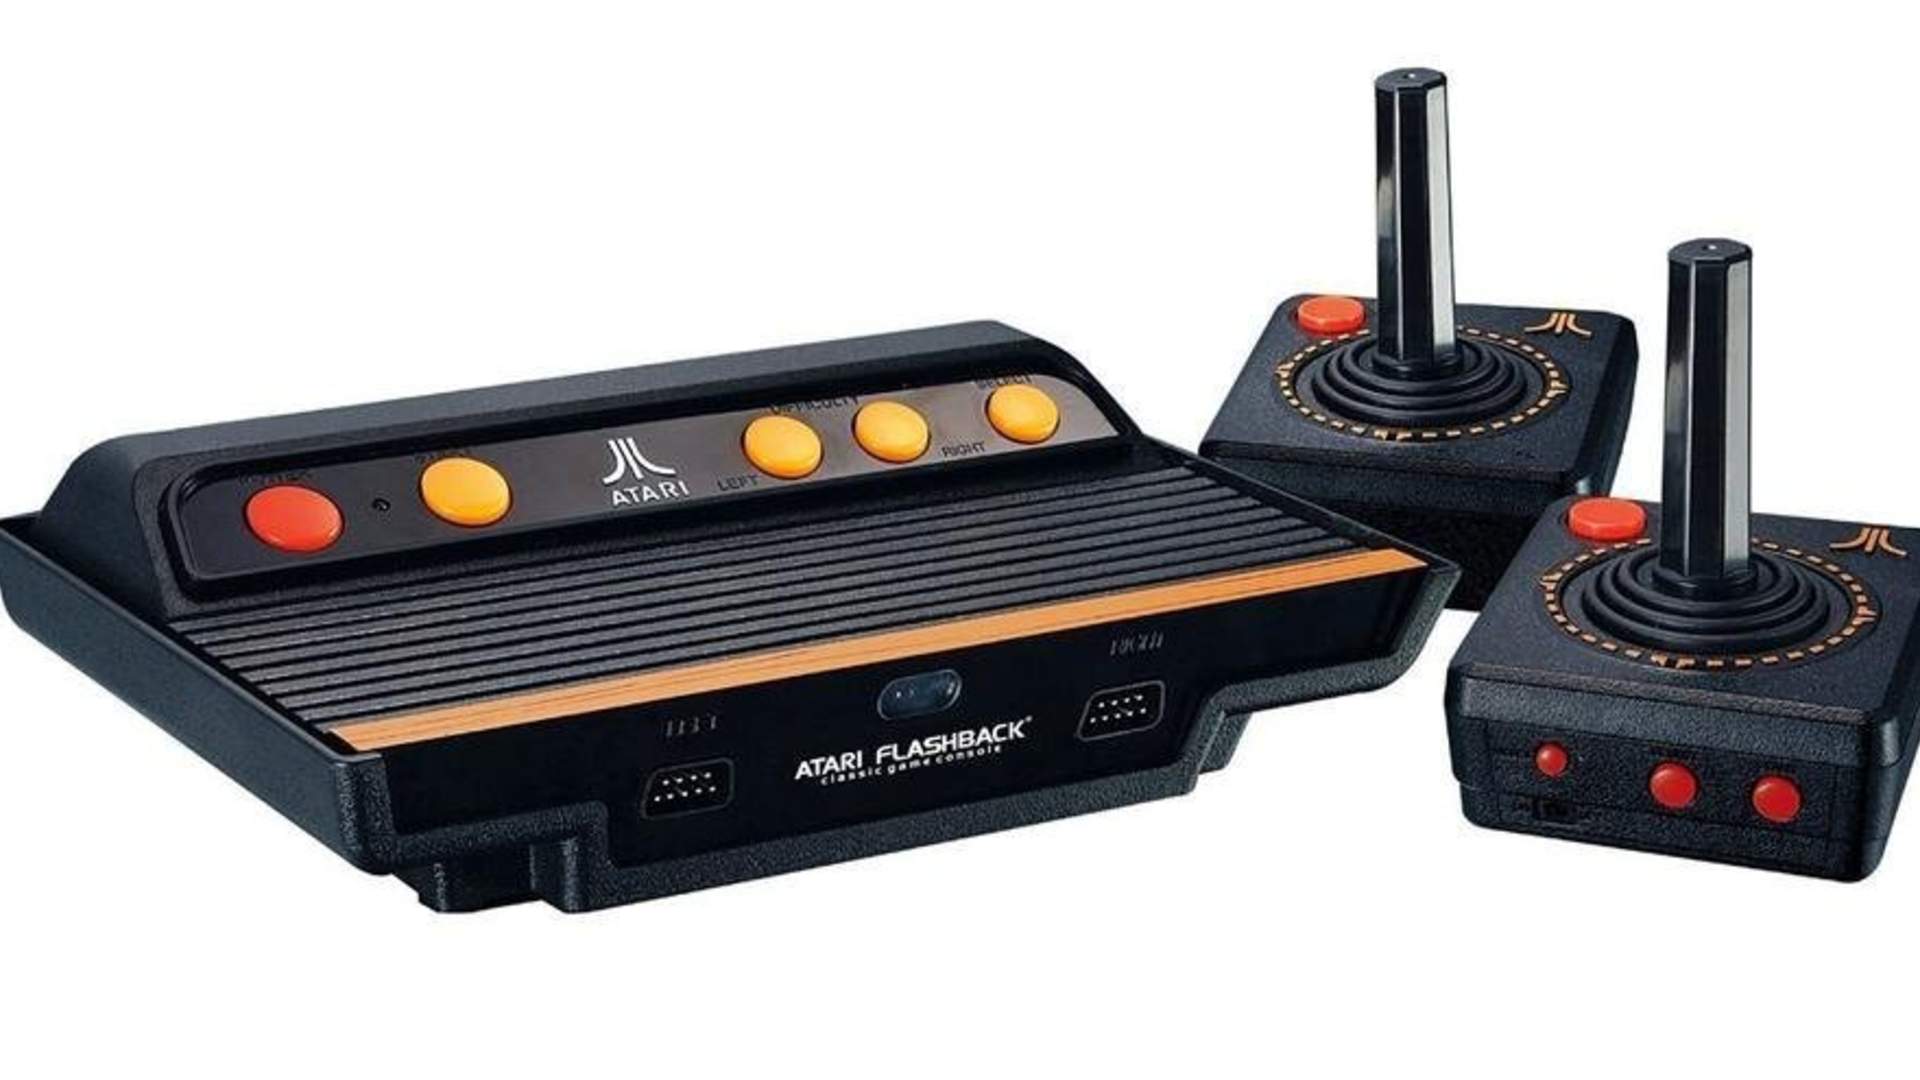 Are The Latest Plug And Play Retro Consoles Worthwhile?